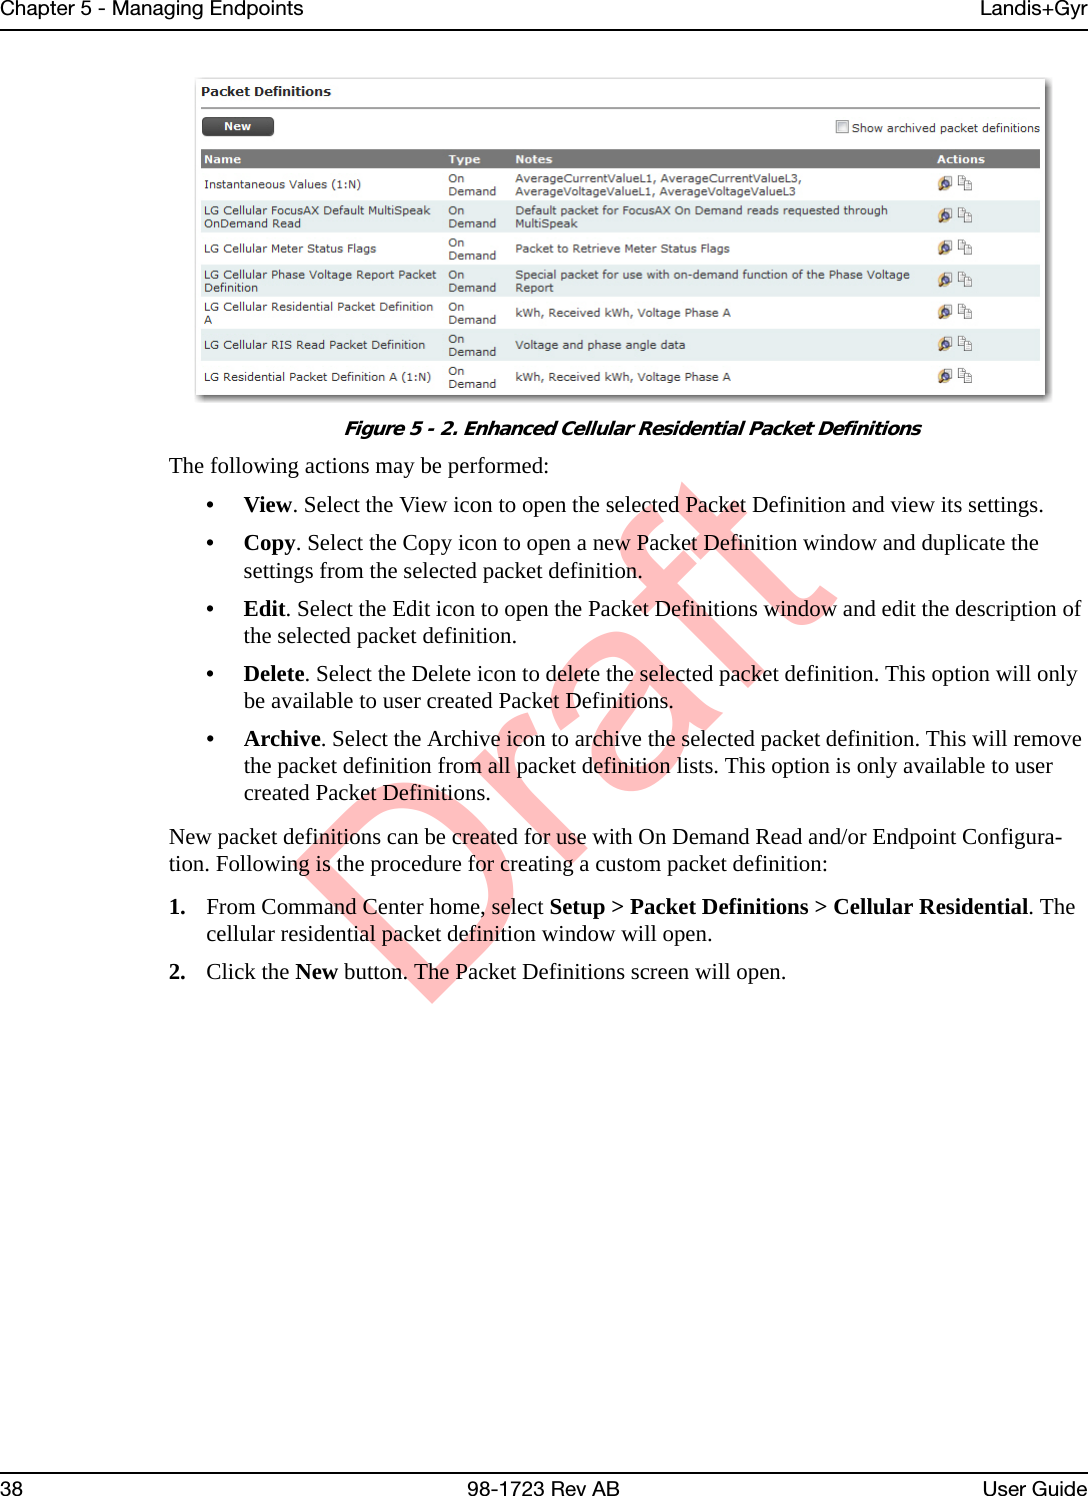 DraftChapter 5 - Managing Endpoints Landis+Gyr38 98-1723 Rev AB User Guide Figure 5 - 2. Enhanced Cellular Residential Packet DefinitionsThe following actions may be performed:•View. Select the View icon to open the selected Packet Definition and view its settings.•Copy. Select the Copy icon to open a new Packet Definition window and duplicate the settings from the selected packet definition.•Edit. Select the Edit icon to open the Packet Definitions window and edit the description of the selected packet definition.•Delete. Select the Delete icon to delete the selected packet definition. This option will only be available to user created Packet Definitions.•Archive. Select the Archive icon to archive the selected packet definition. This will remove the packet definition from all packet definition lists. This option is only available to user created Packet Definitions.New packet definitions can be created for use with On Demand Read and/or Endpoint Configura-tion. Following is the procedure for creating a custom packet definition:1. From Command Center home, select Setup &gt; Packet Definitions &gt; Cellular Residential. The cellular residential packet definition window will open.2. Click the New button. The Packet Definitions screen will open.